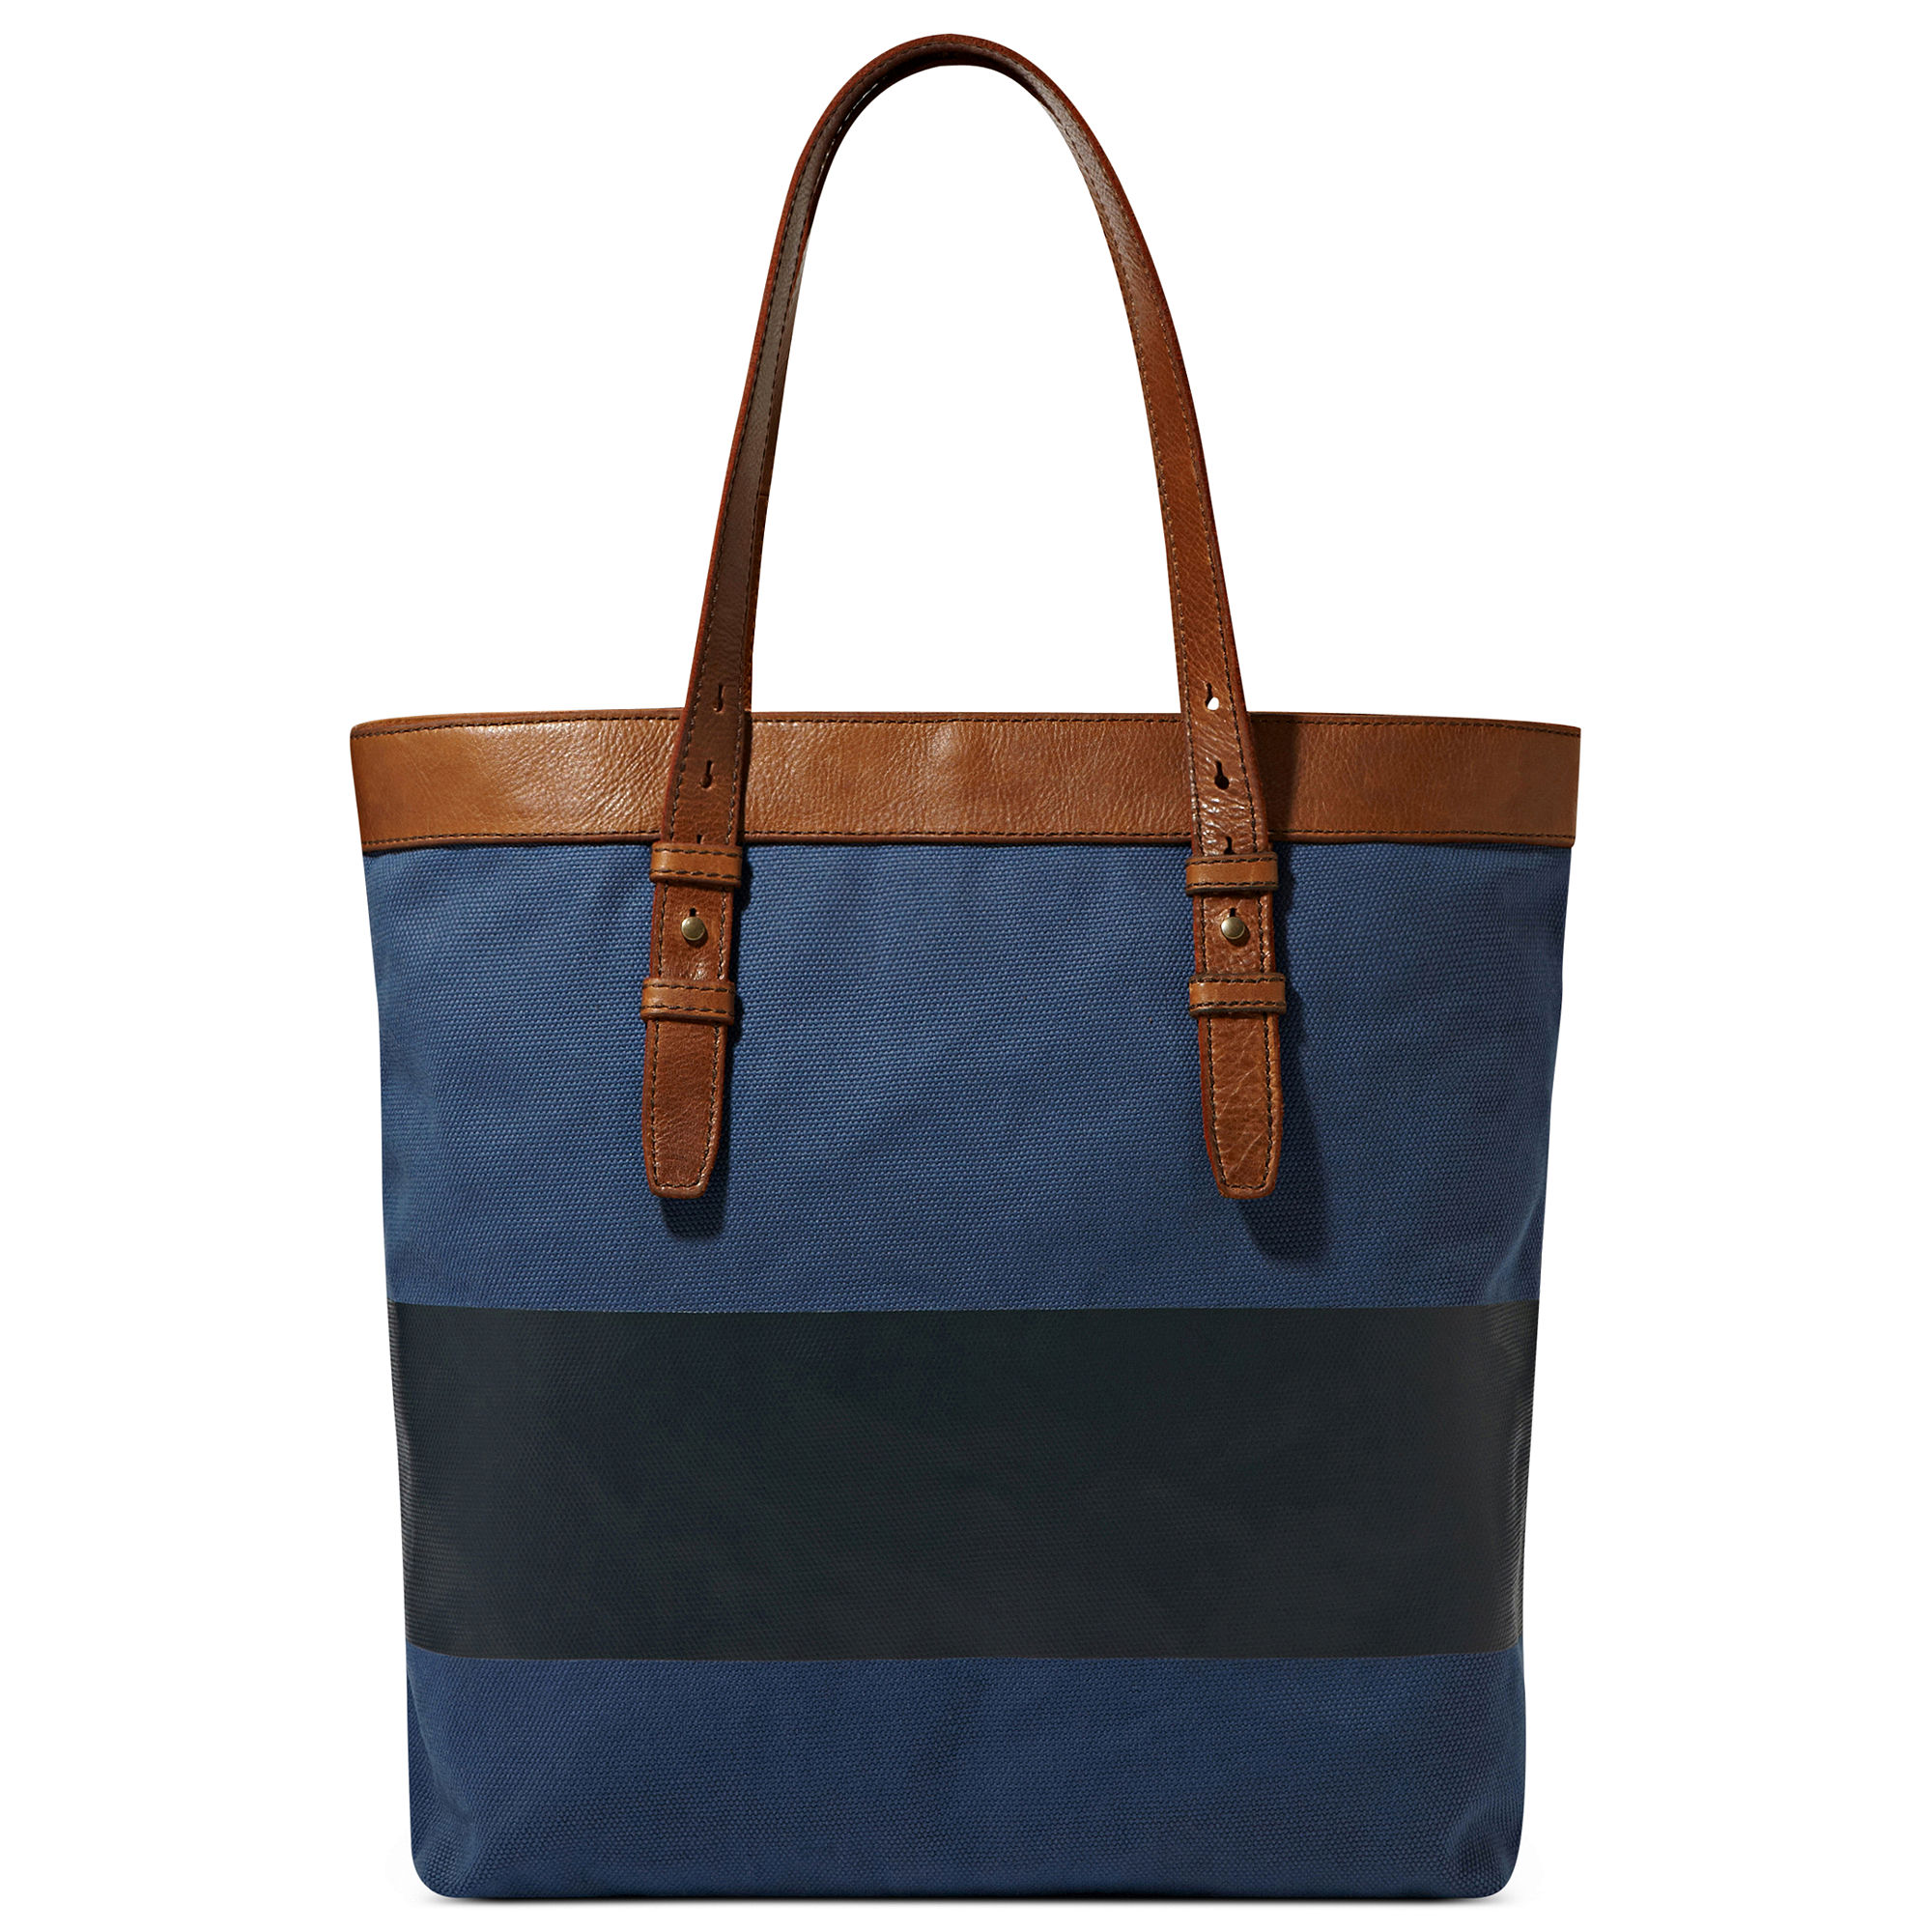 Lyst - Fossil Utility Canvas Bag in Blue for Men